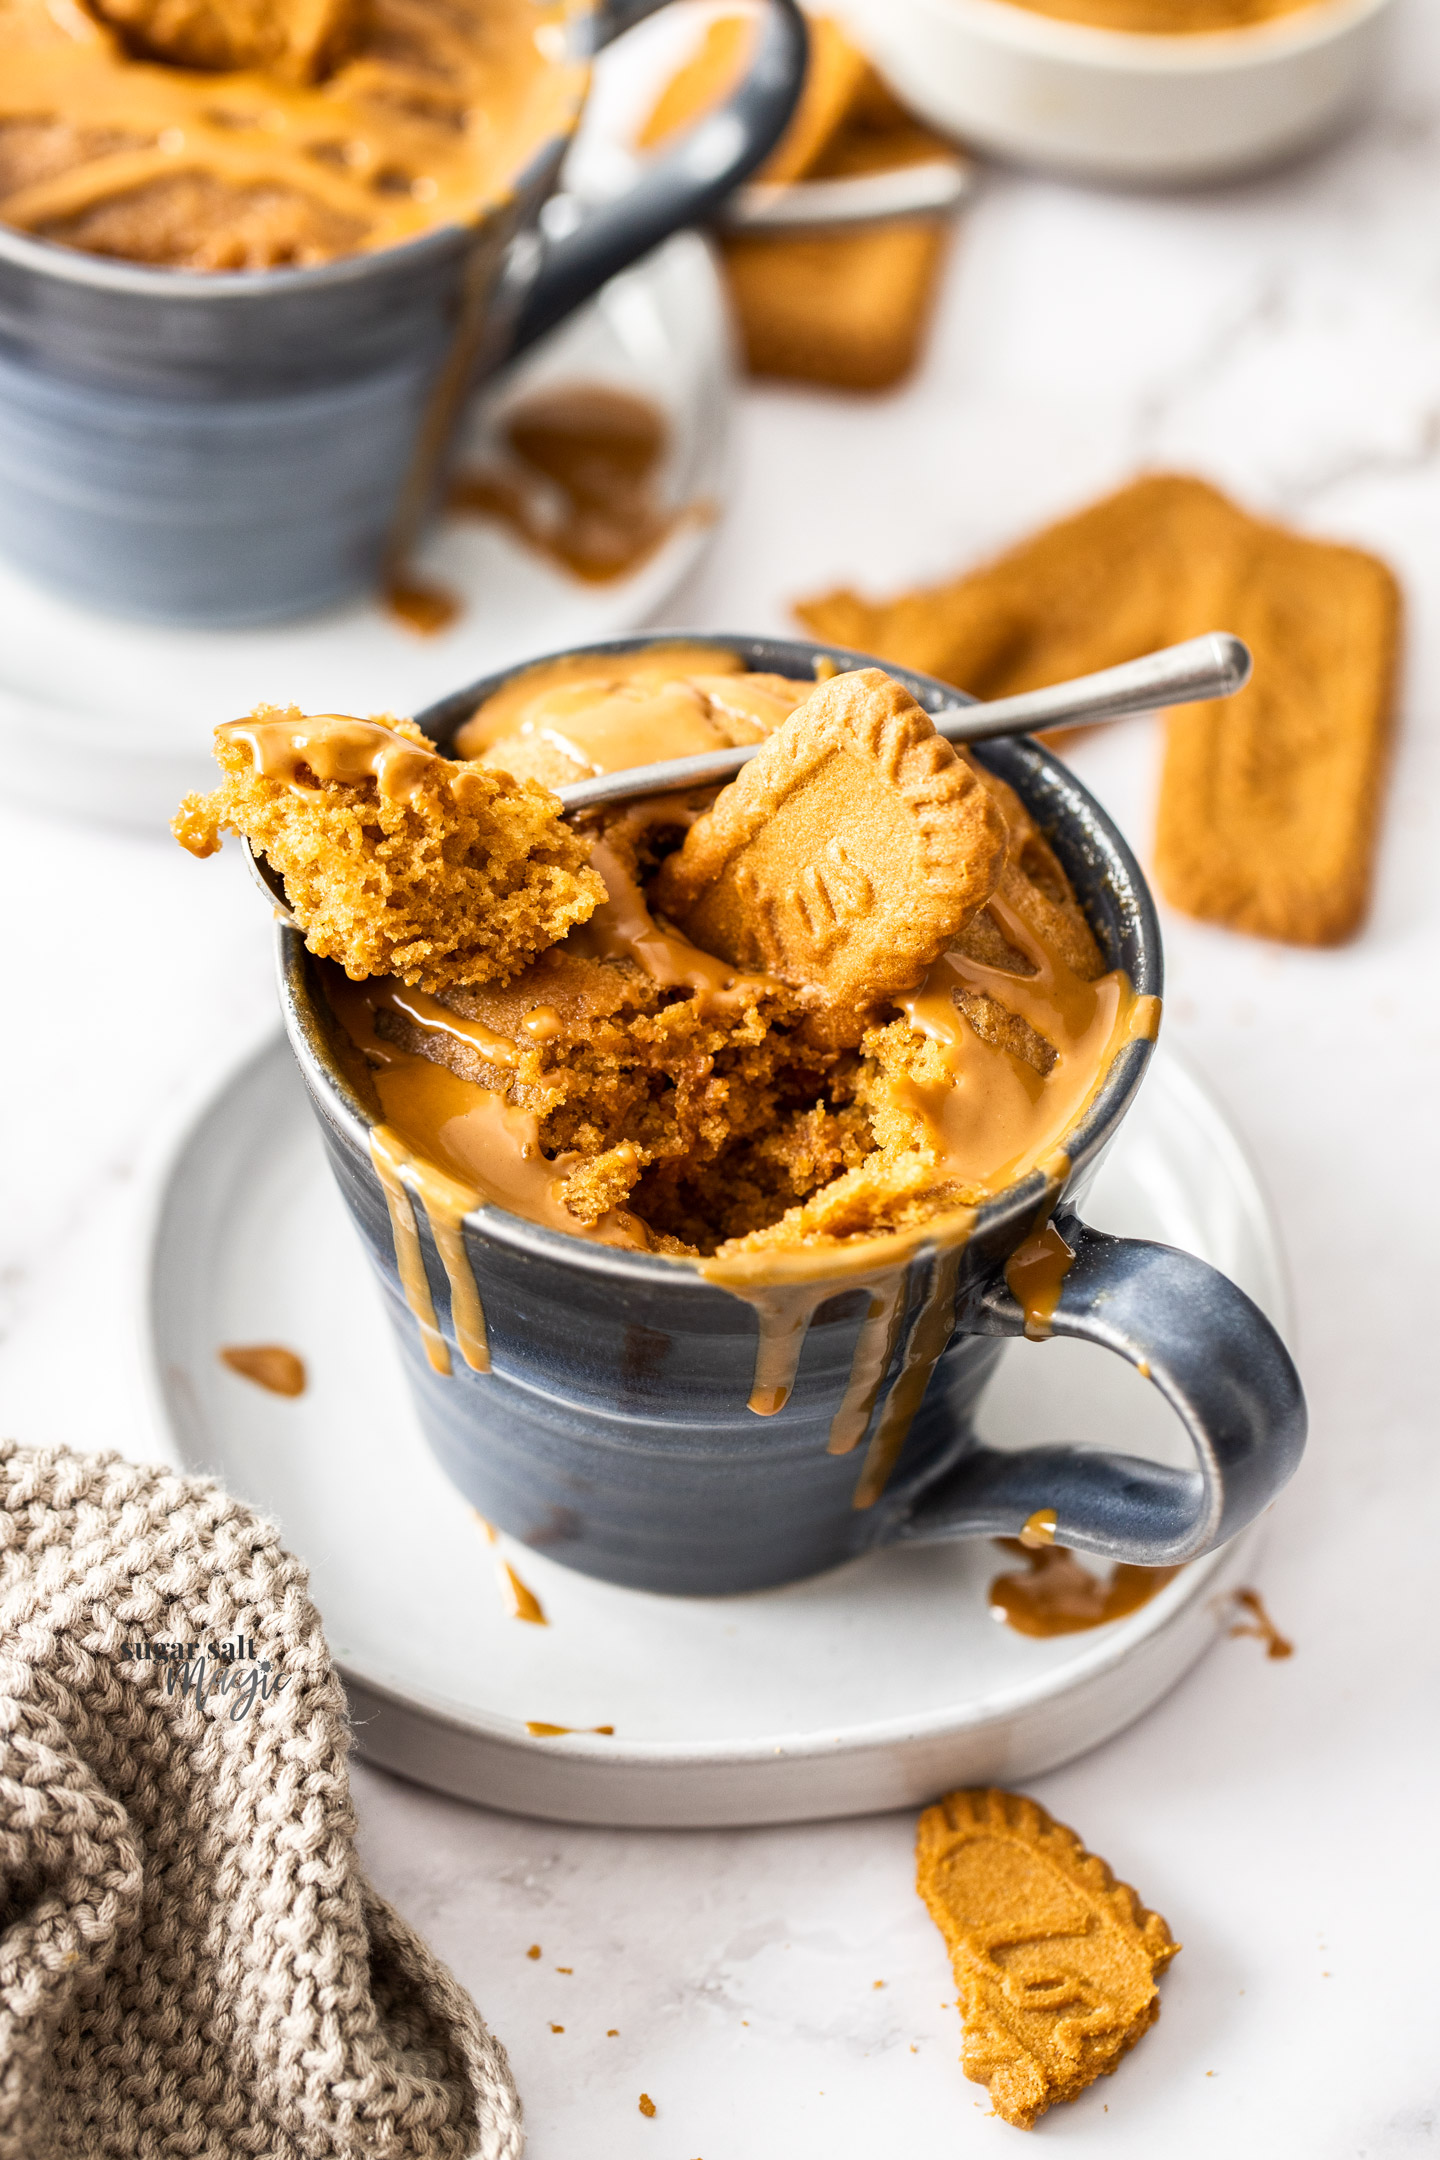 A cake in a mug with a cookie sticking out.